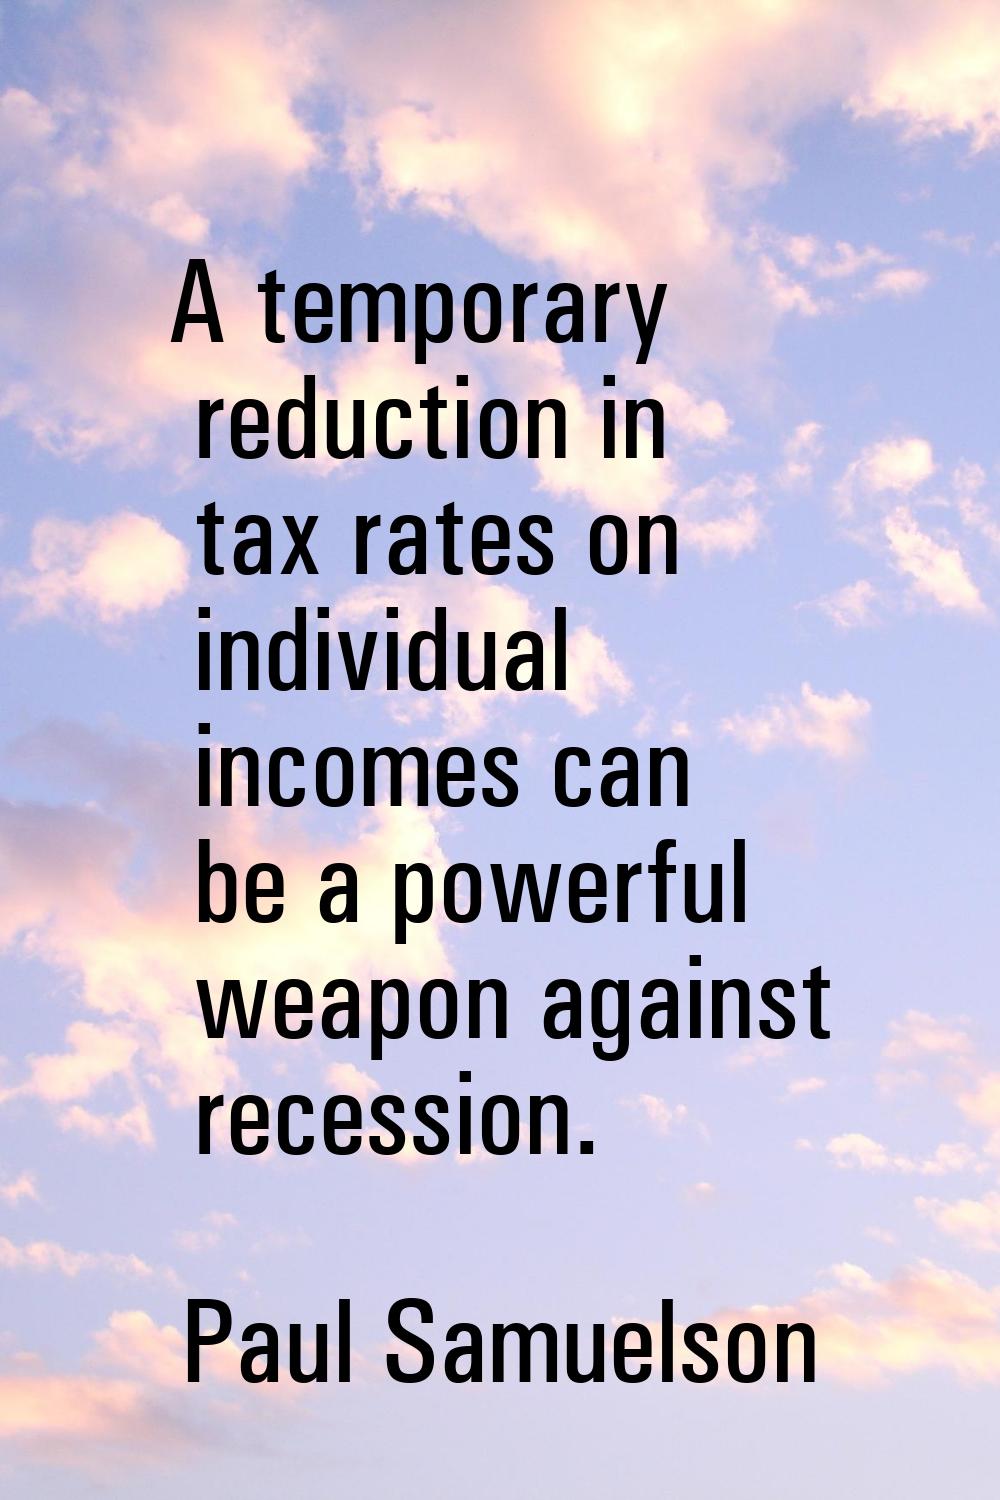 A temporary reduction in tax rates on individual incomes can be a powerful weapon against recession